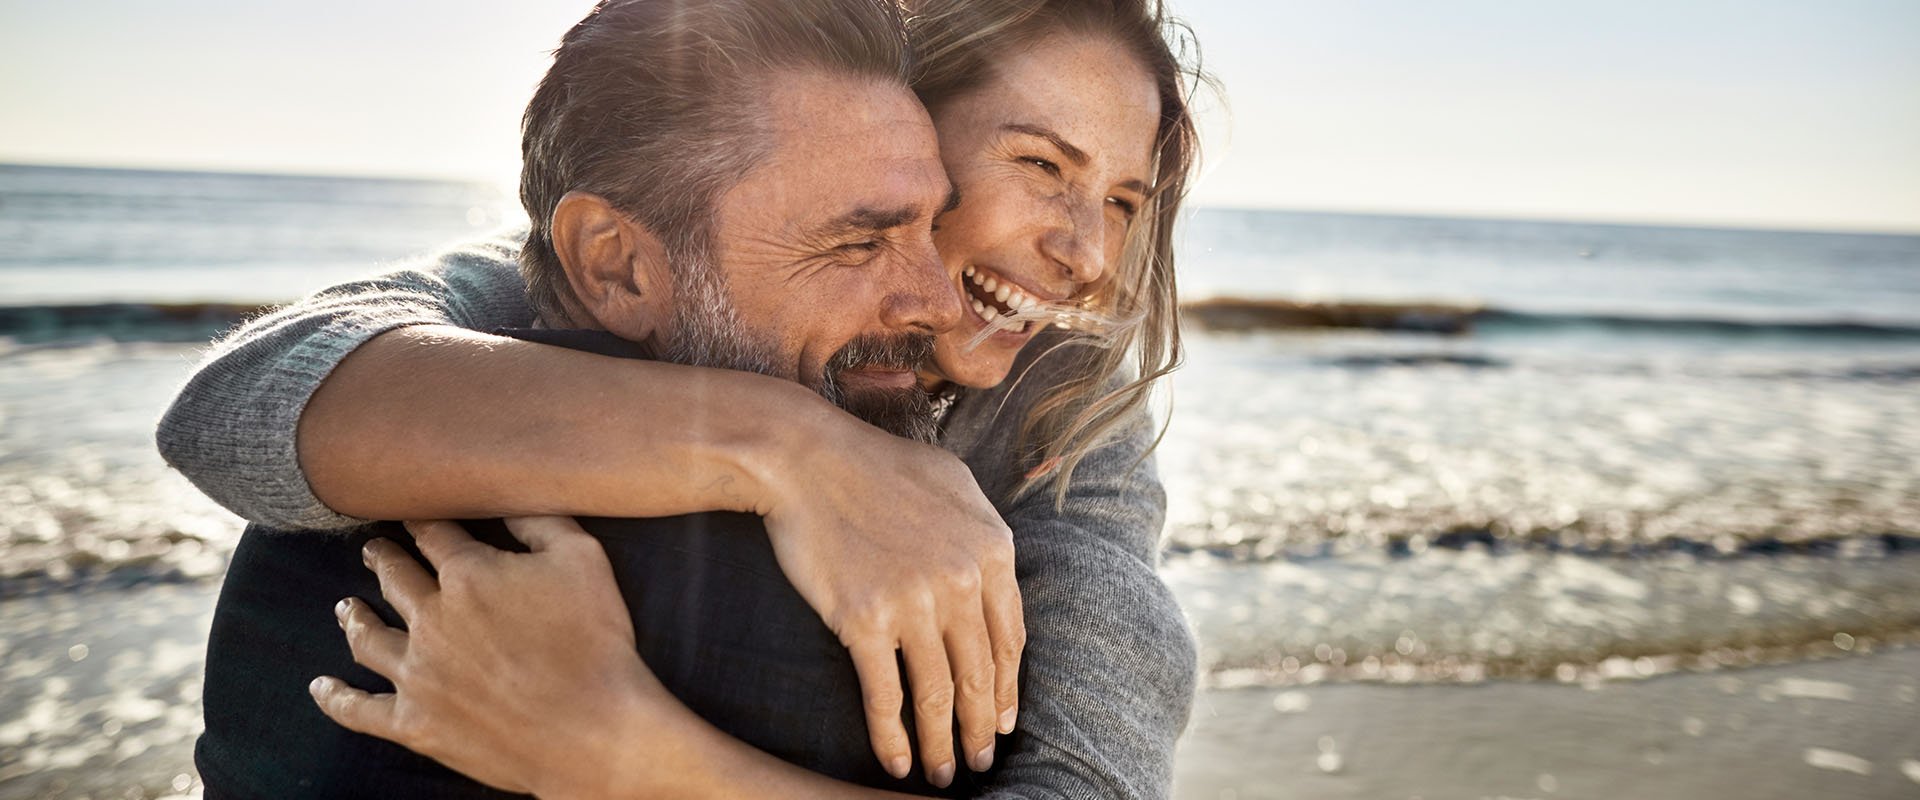 An age-gap-couple on the beach. They are hugging and laughing.